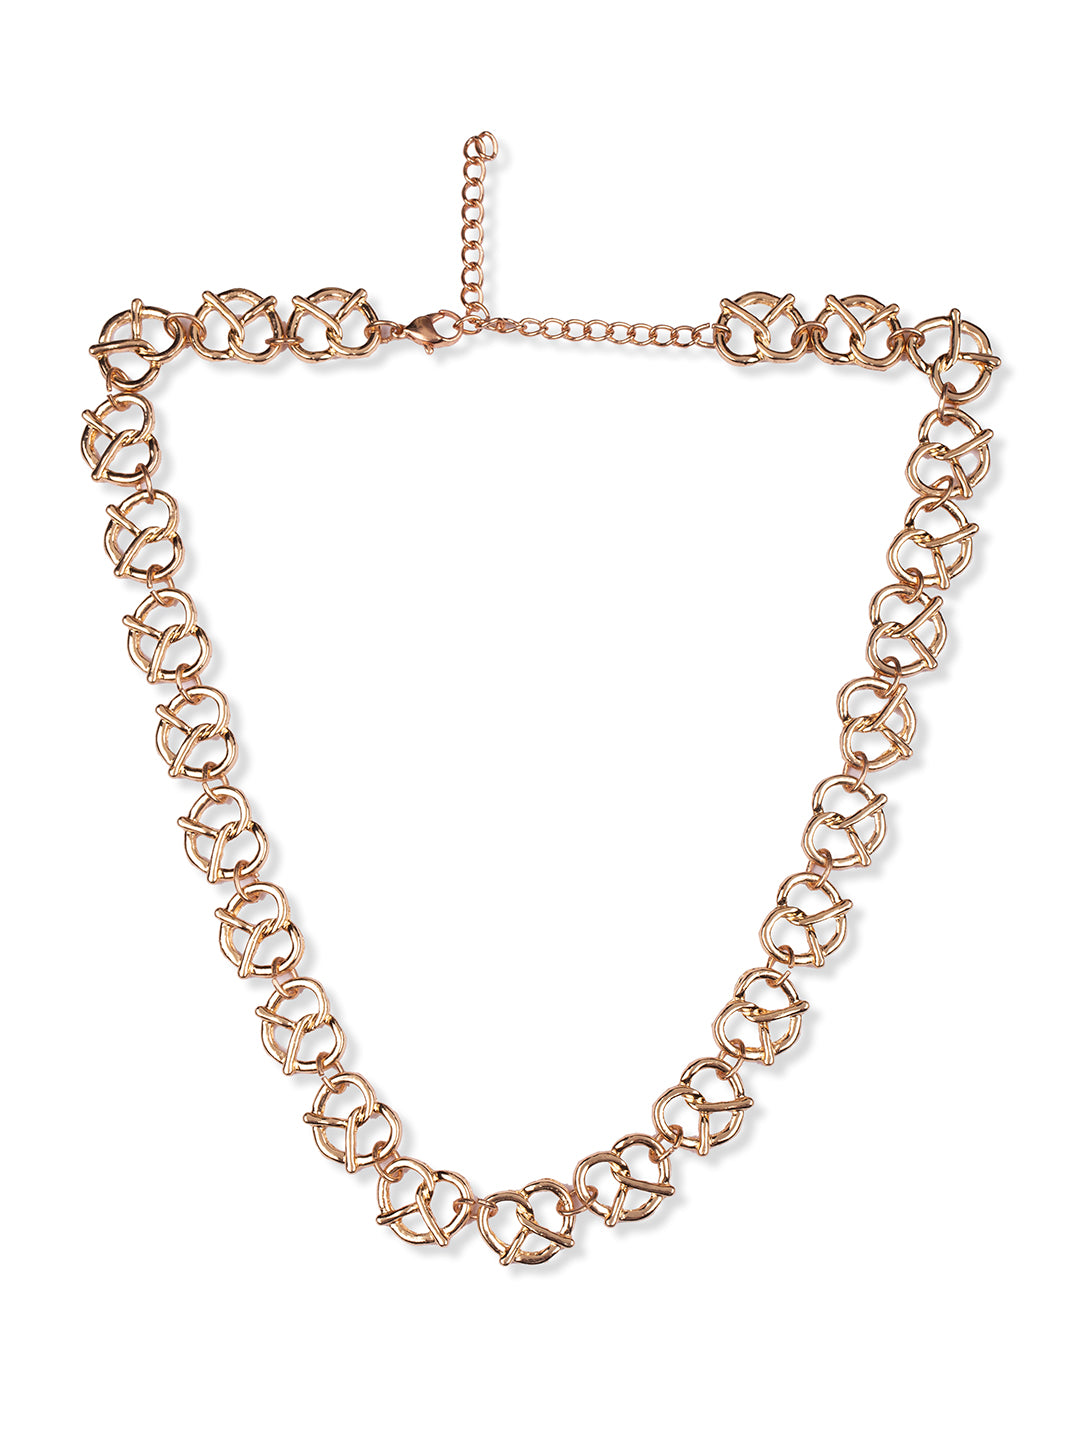 Prita by Priyaasi Twisted Linked Hearts Gold Plated Necklace